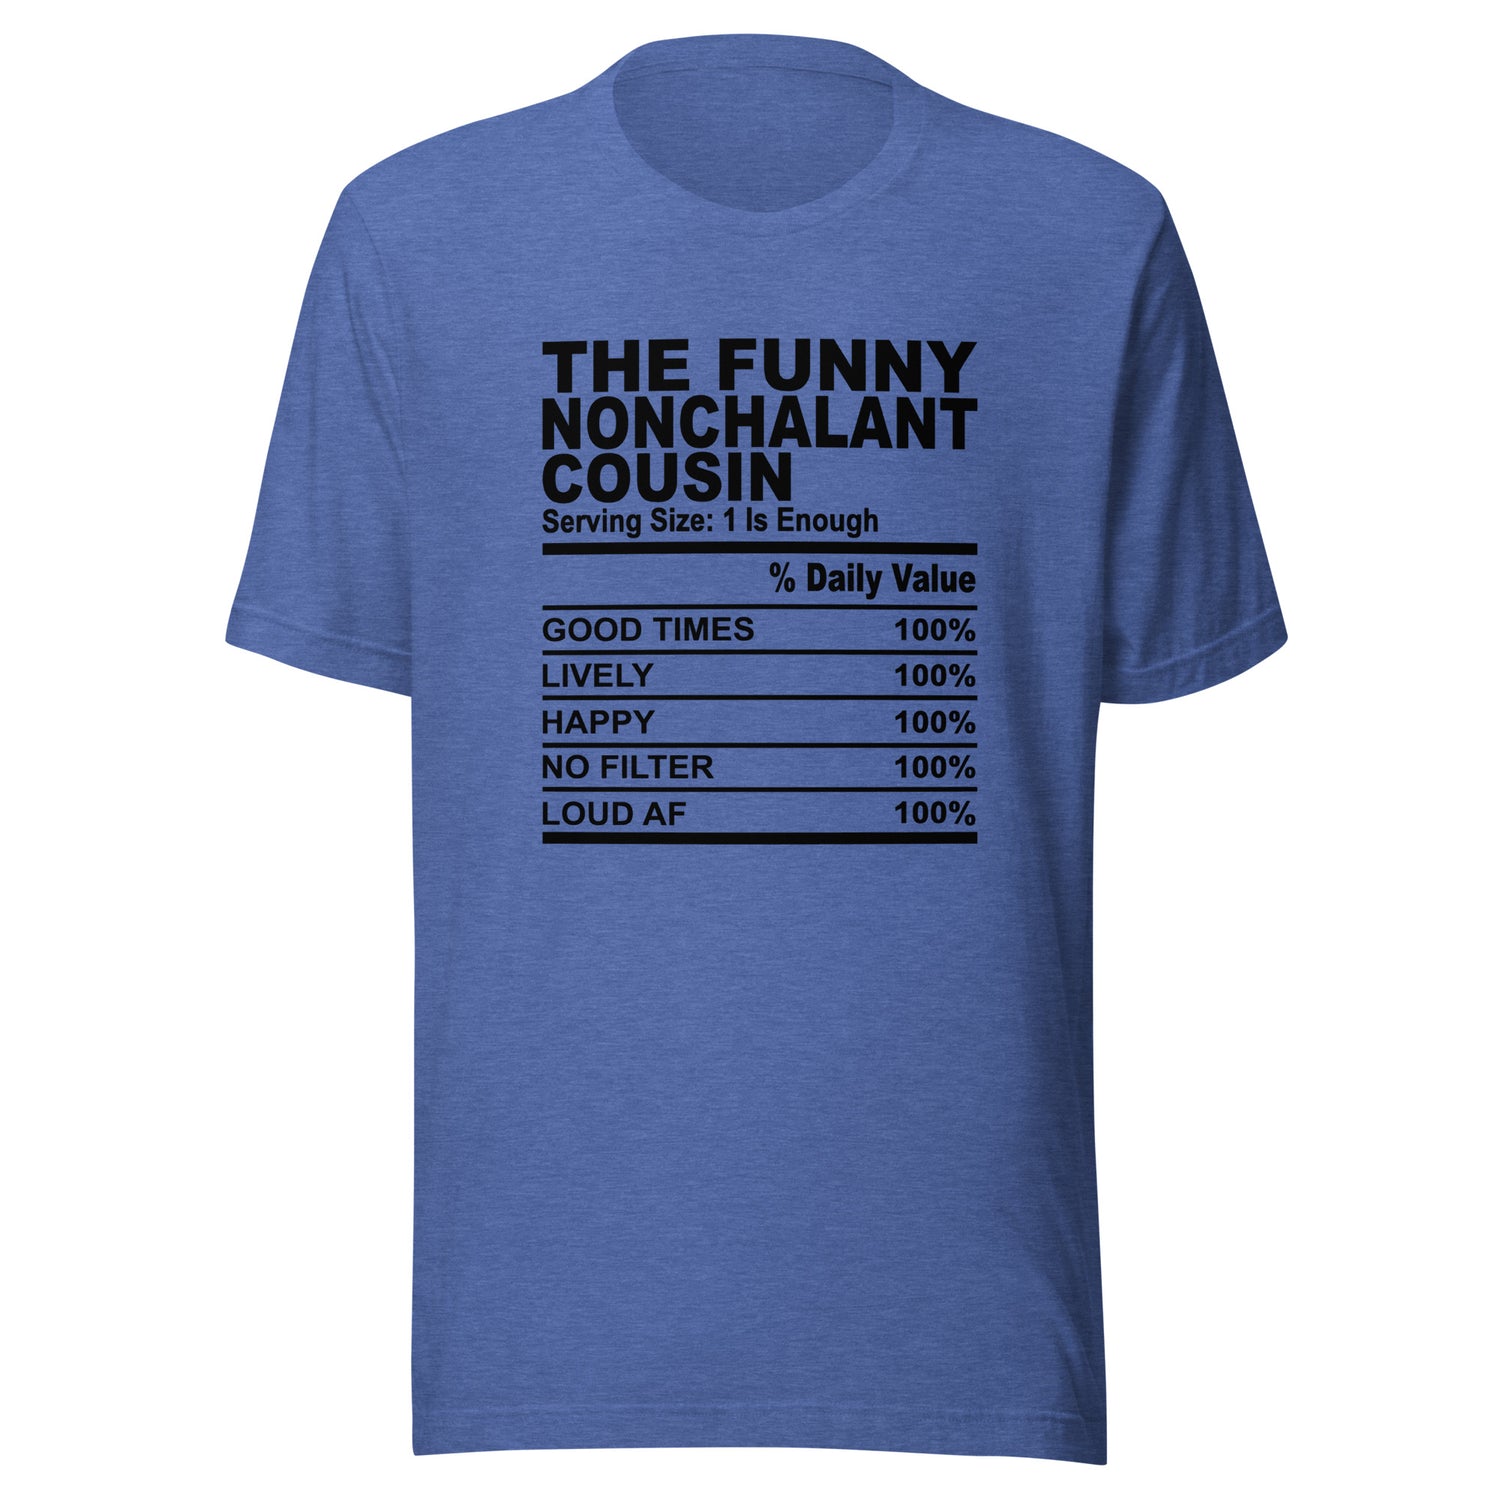 Funny Nonchalant Cousin Tees